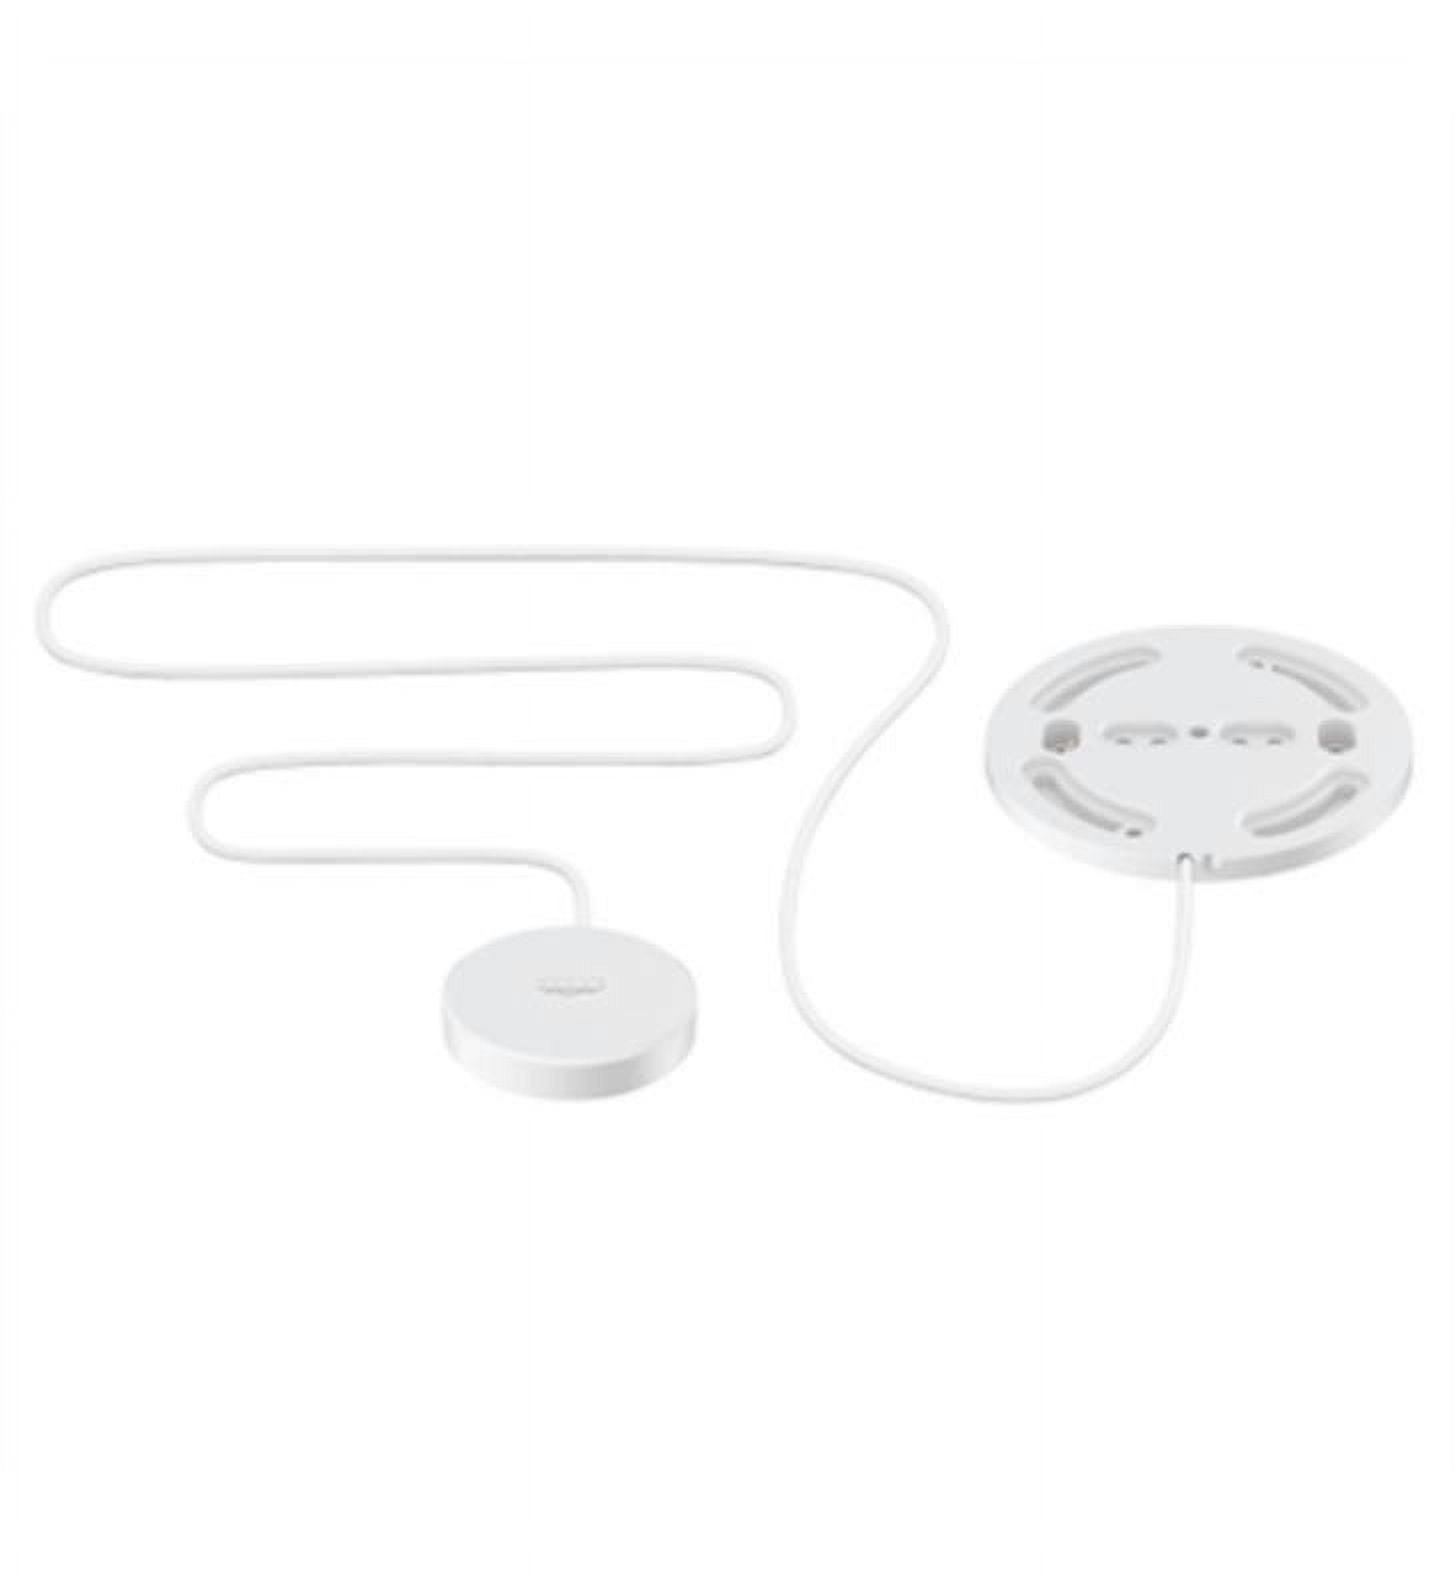 Modern White 3 1/4" Wall Mount Water Security Extension Set